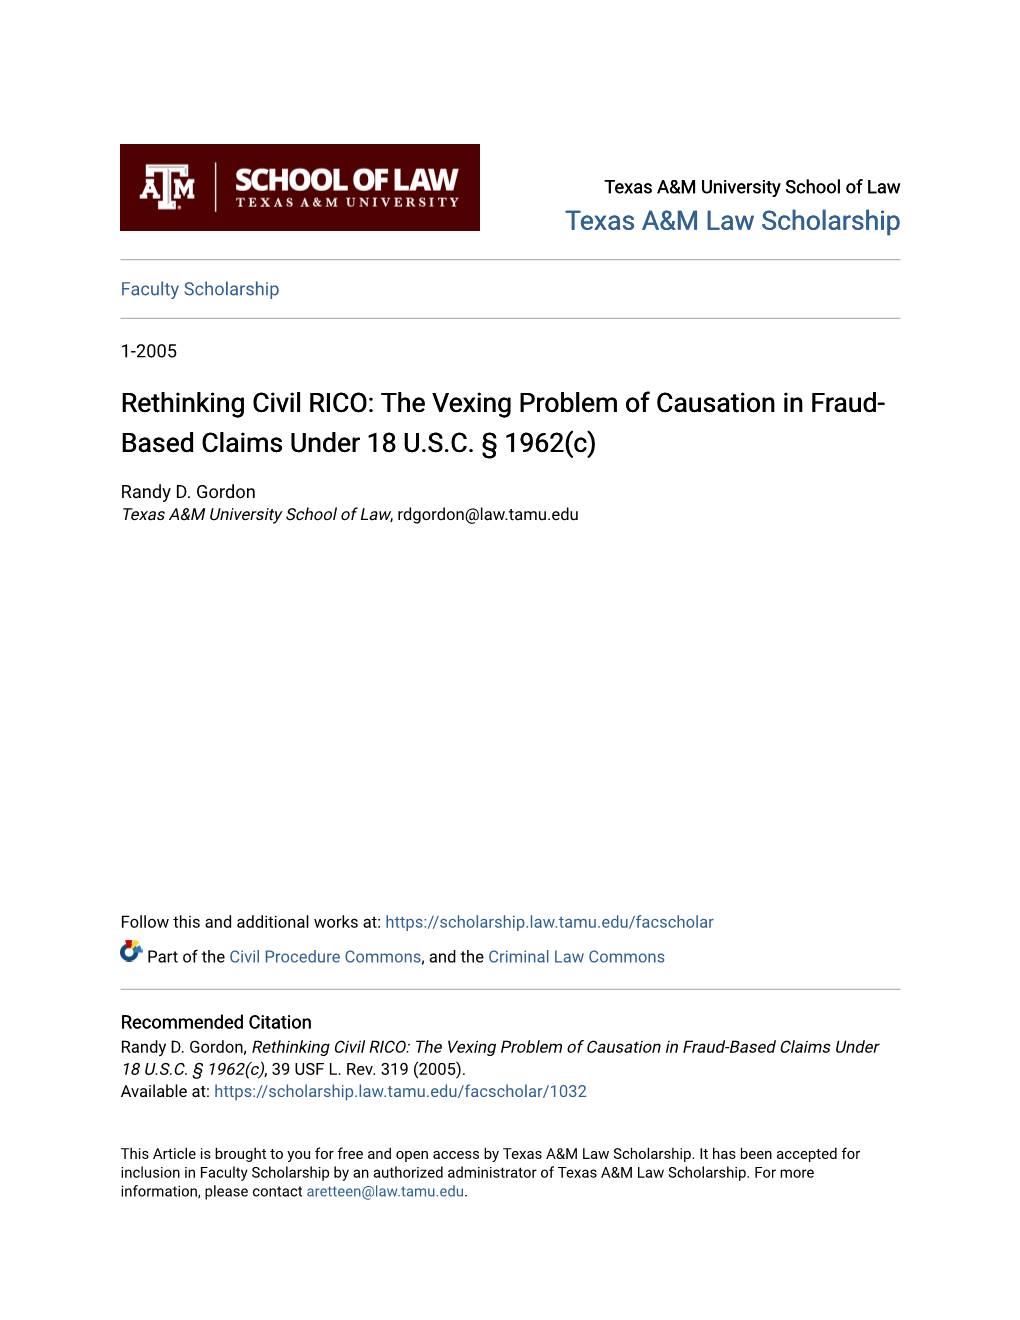 Rethinking Civil RICO: the Vexing Problem of Causation in Fraud- Based Claims Under 18 U.S.C